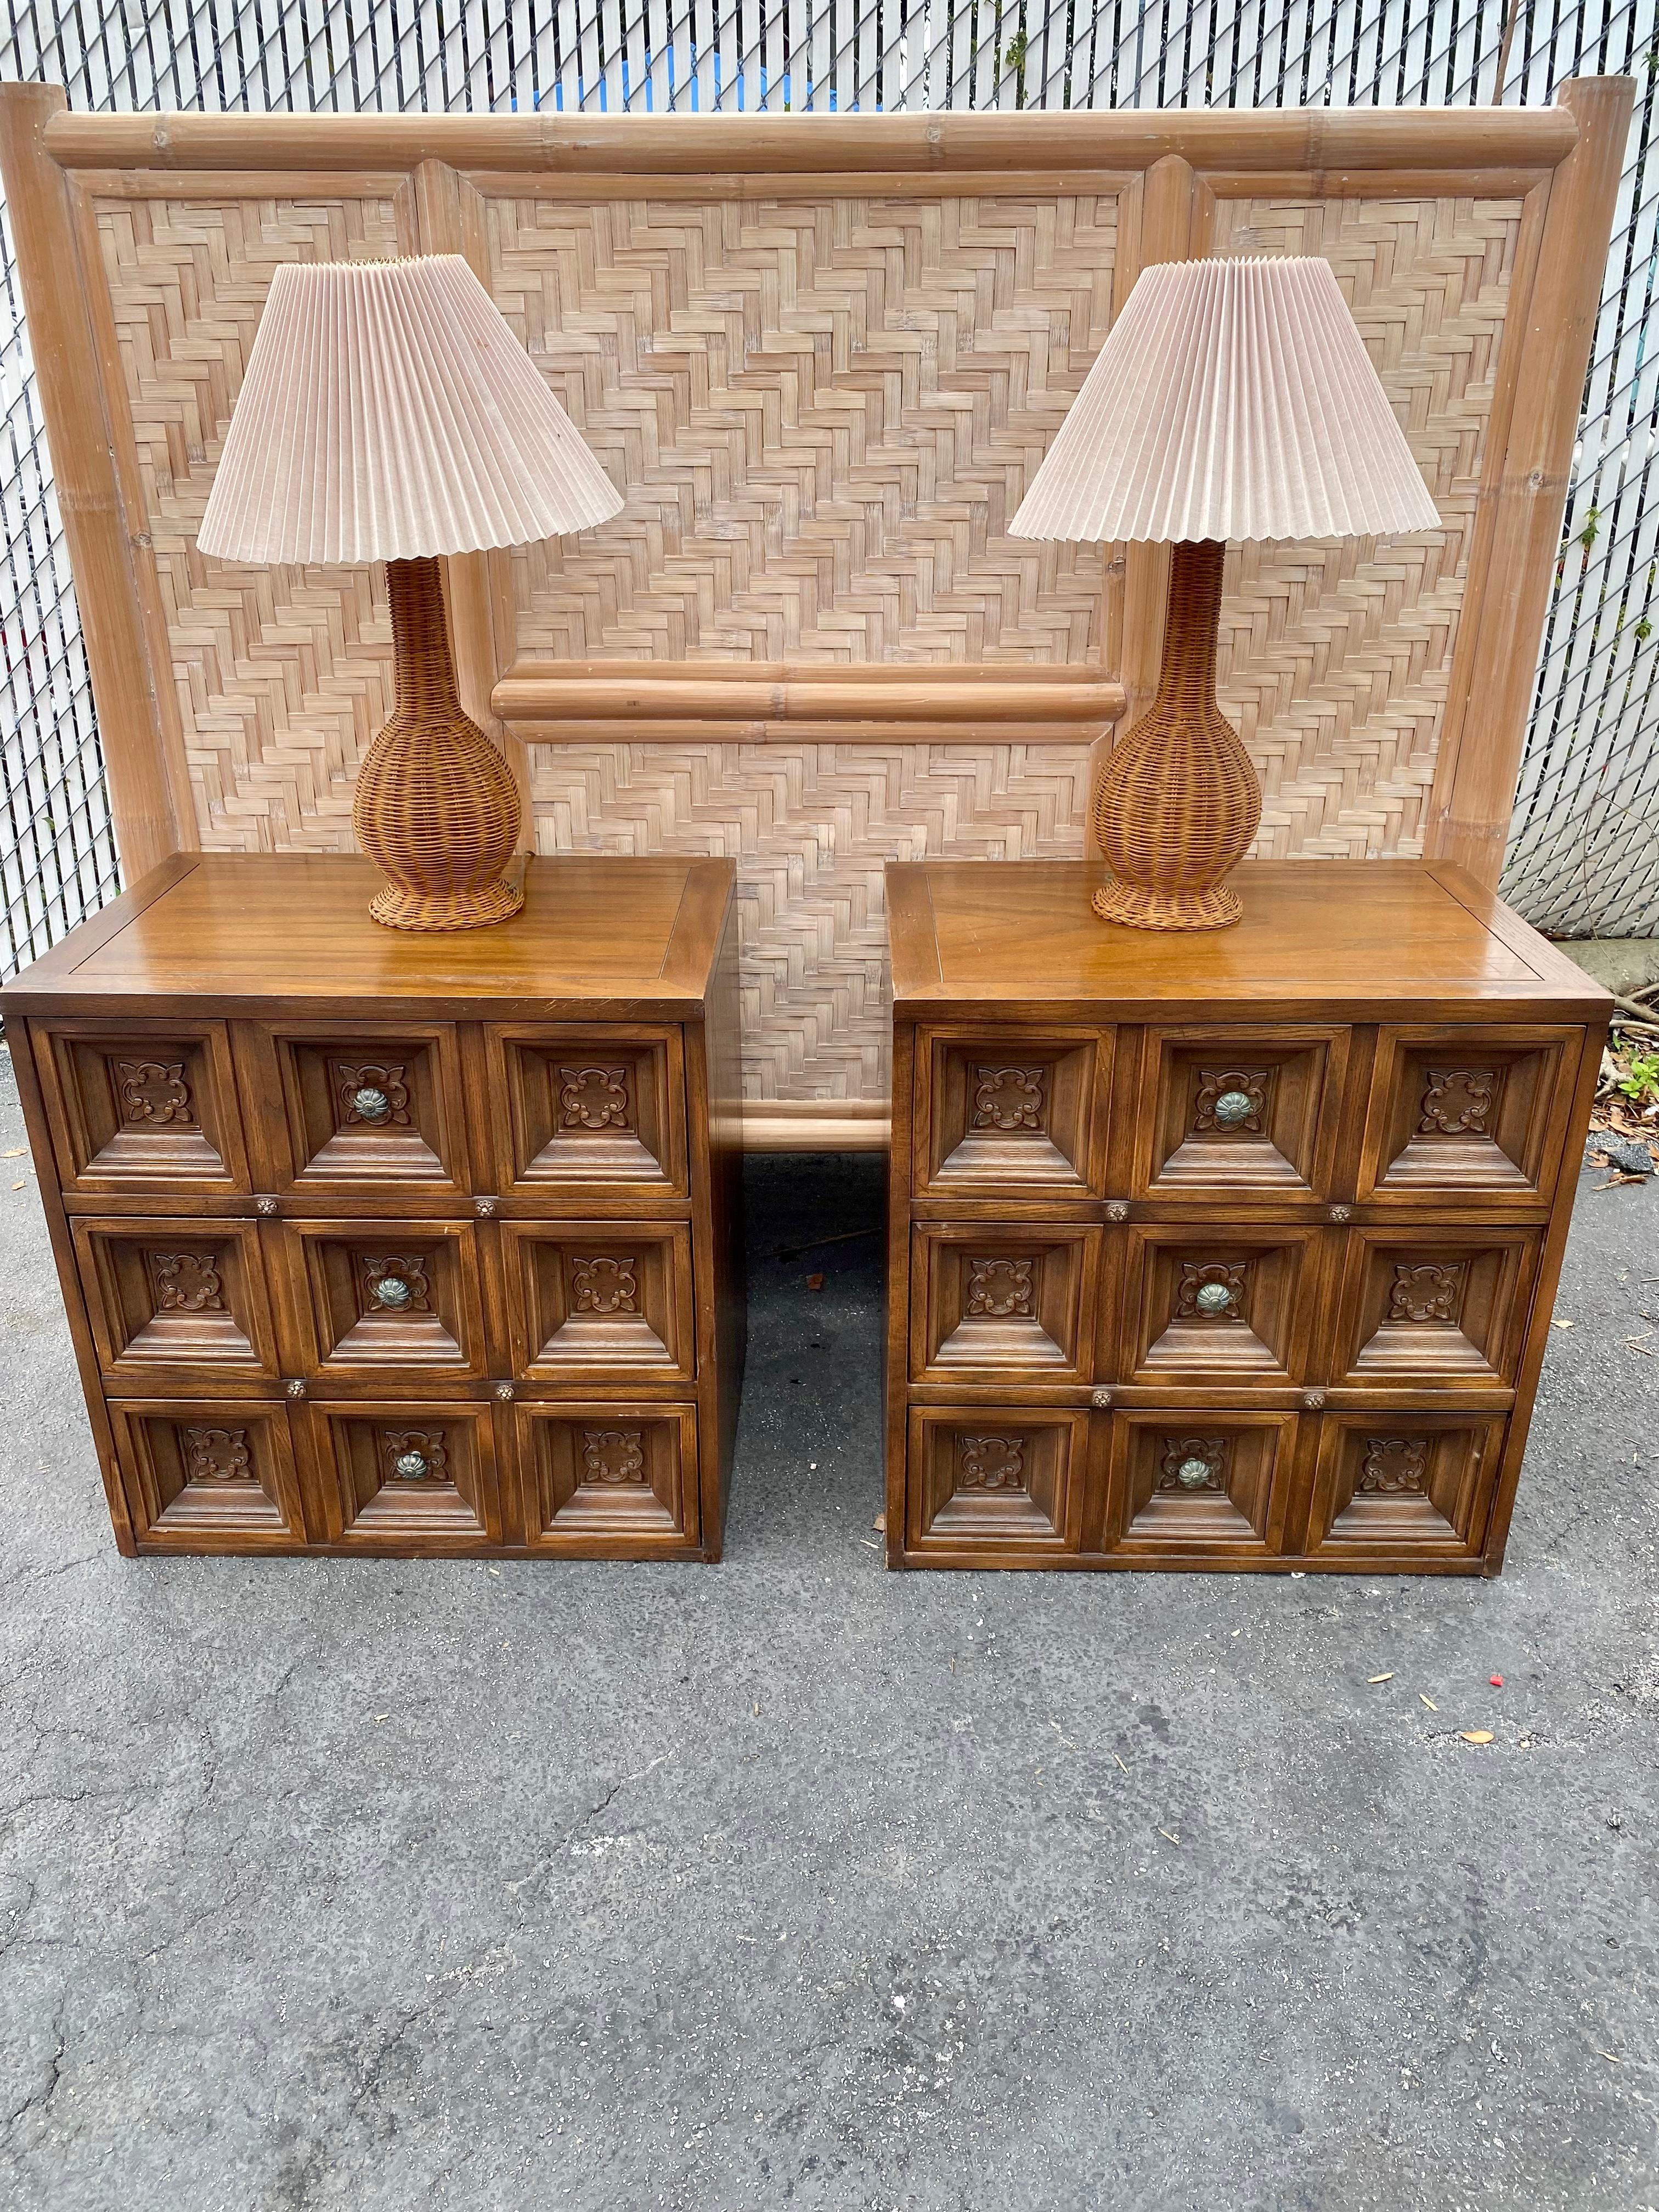 On offer on this occasion is one of the most stunning and rare rattan lamps you could hope to find. Outstanding design is exhibited throughout. The beautiful set is statement piece and packed with personality!  Just look at the gorgeous details on